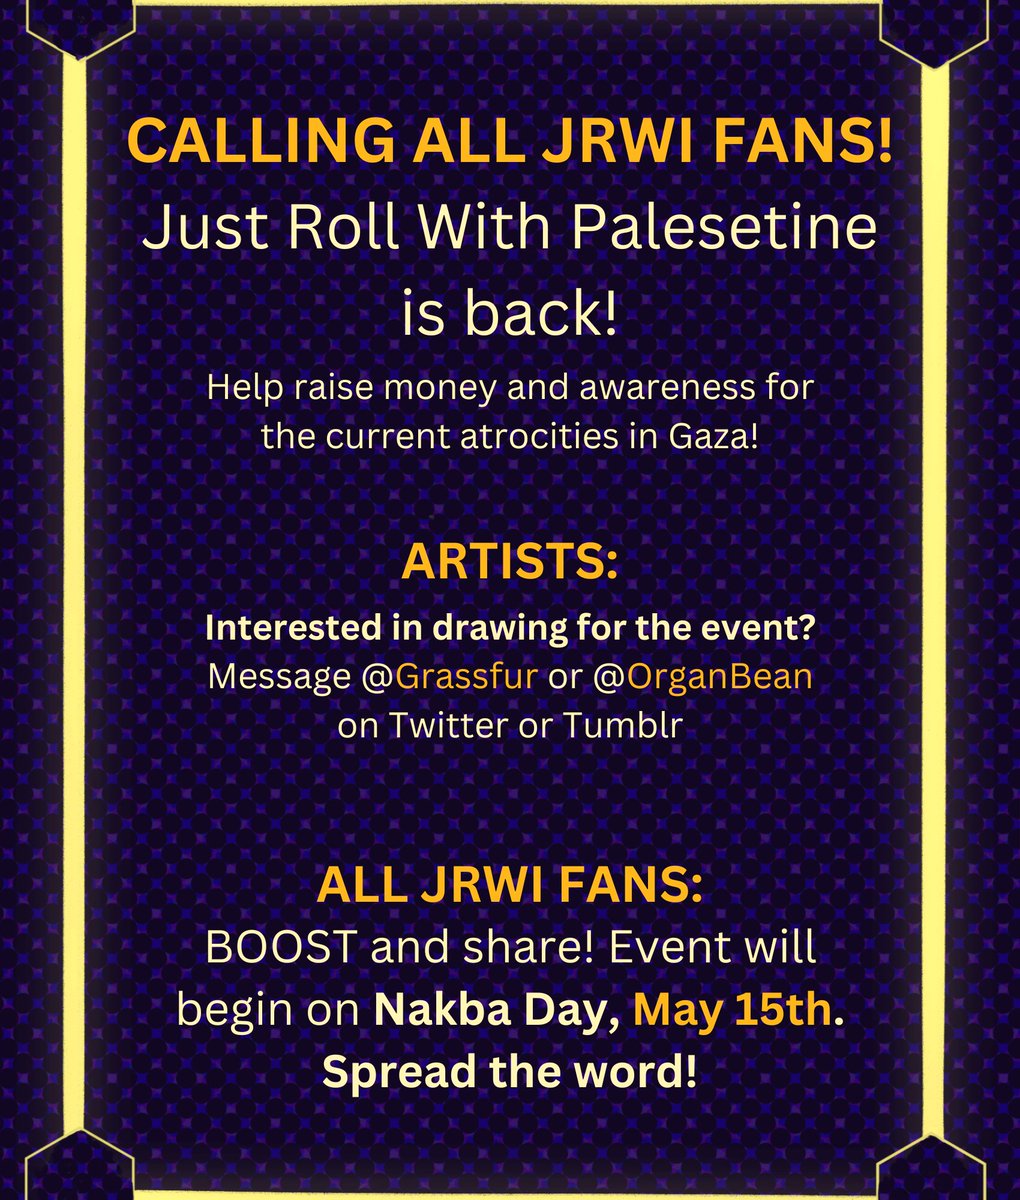 🍉JUST ROLL WITH PALESTINE IS BACK! #JRWI 🍉 Support in Gaza is needed more than ever! JRWP will return on May 15th. RETWEET AND SPREAD THE WORD! #JustRollWithPalestine